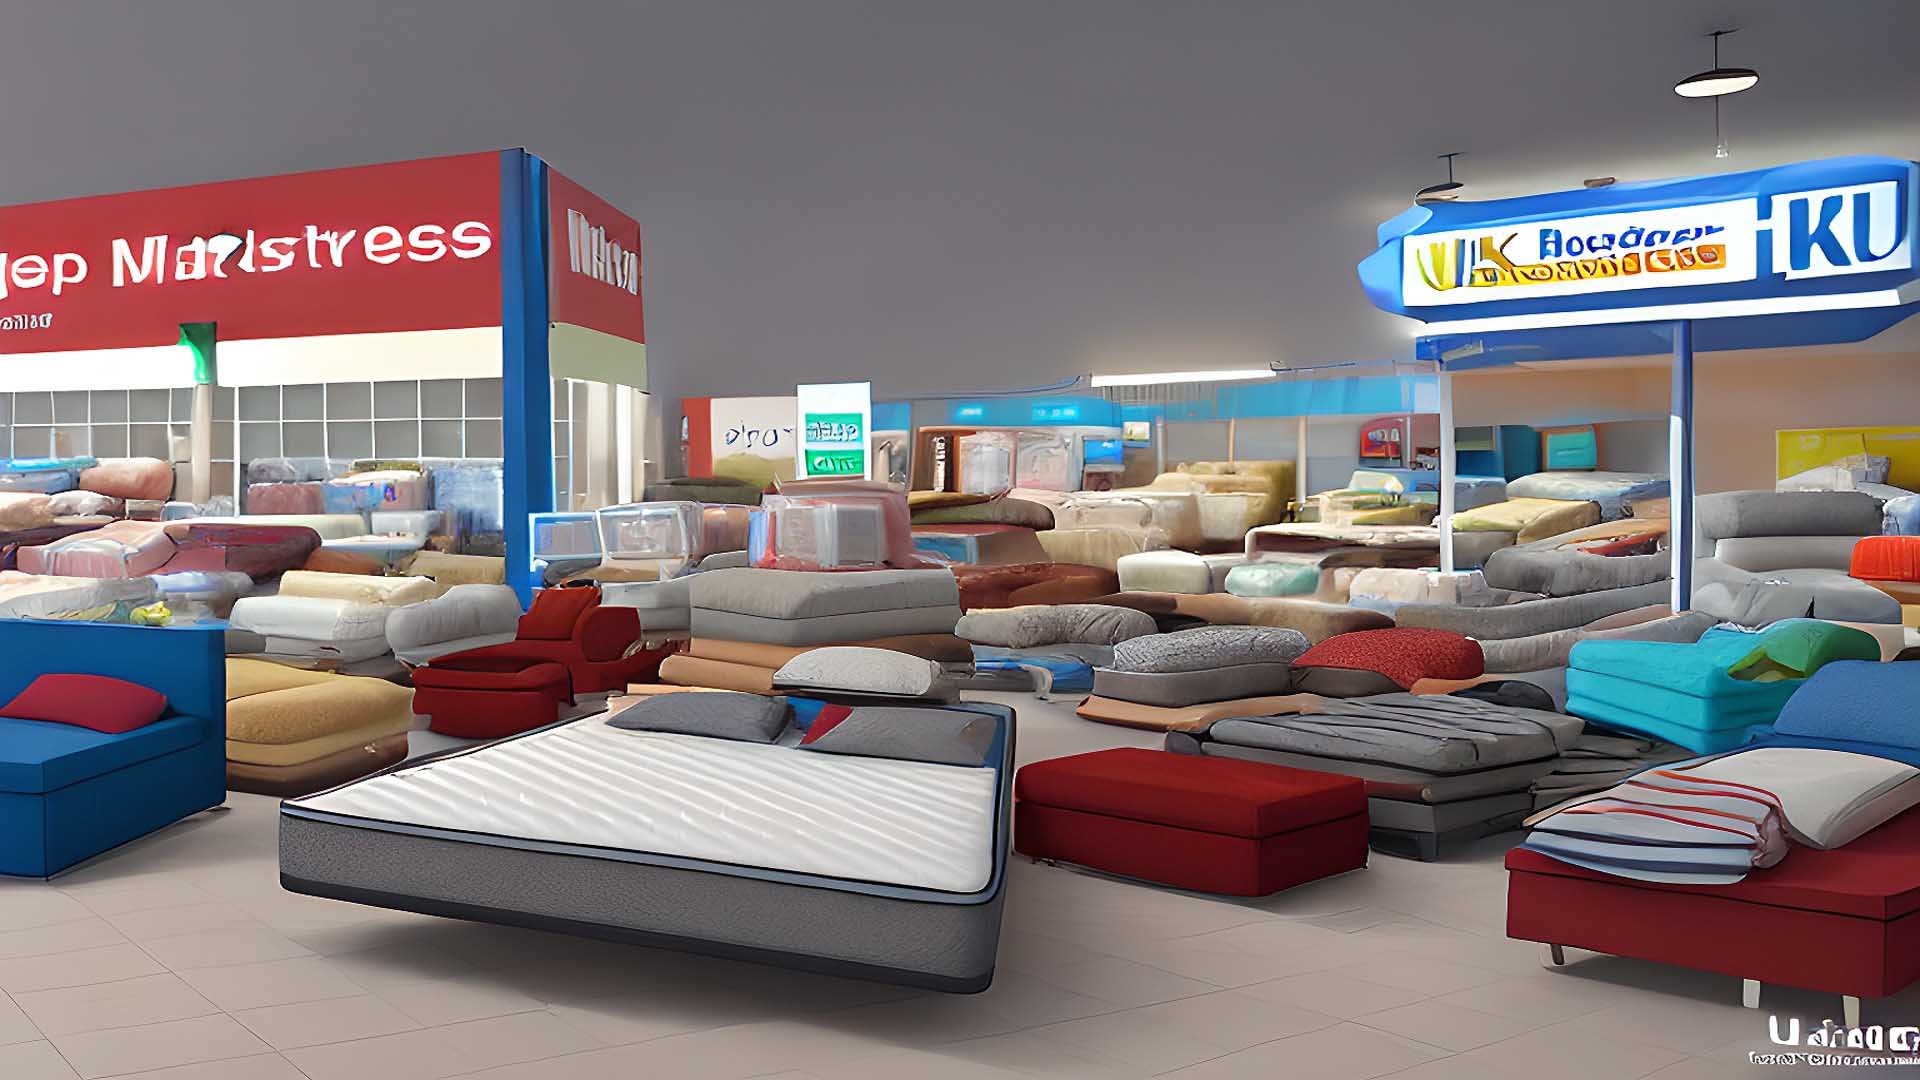 Mattress Firm Near Me in Jackson, Mississippi, MS